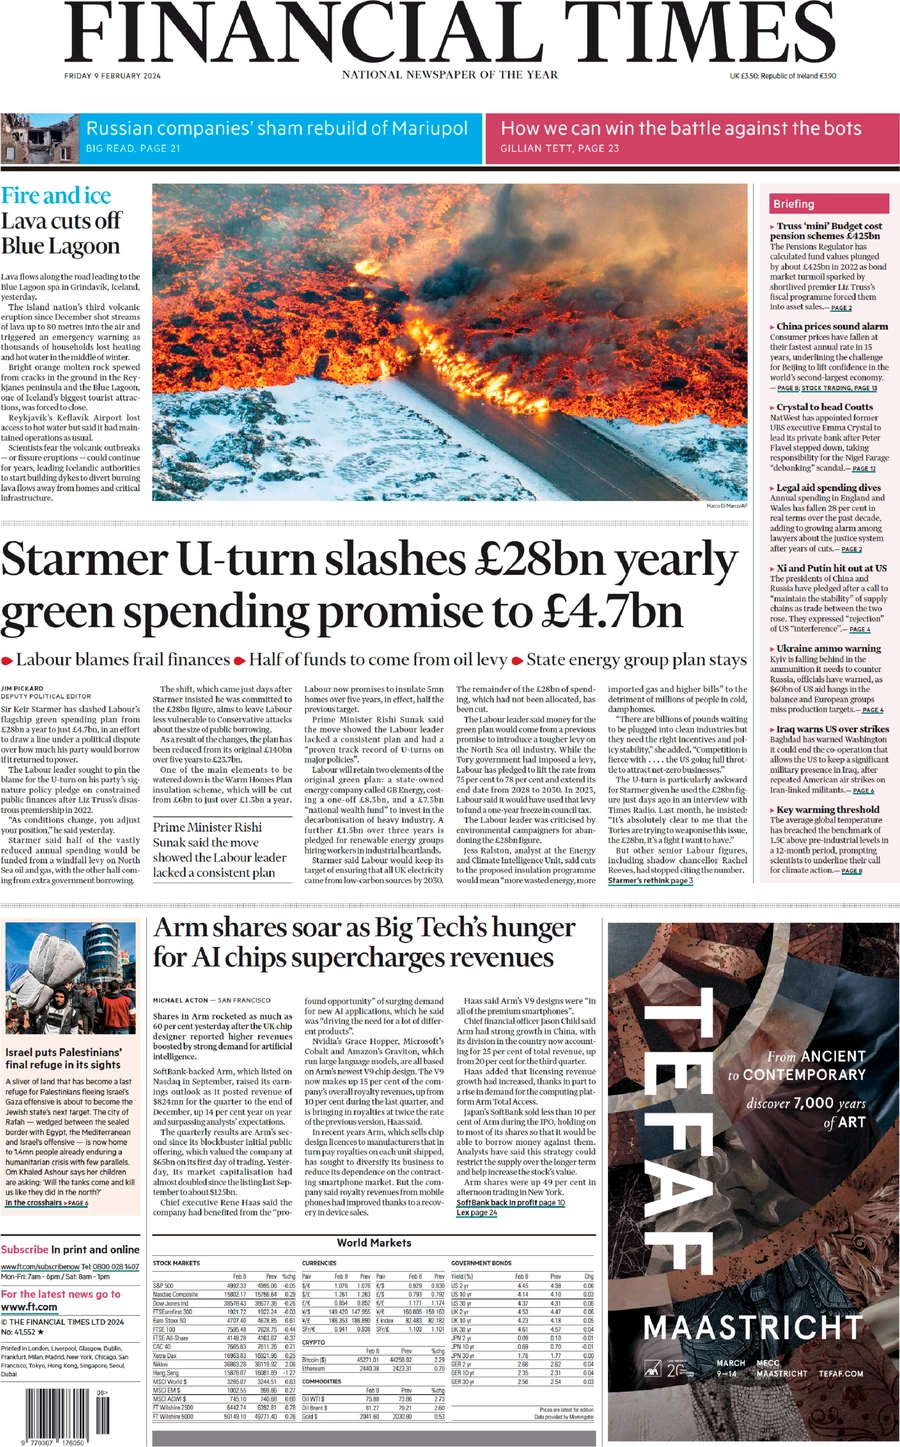 Financial Times - Starmer U-turn slashes £28bn yearly green spending promise to £4.7bn 